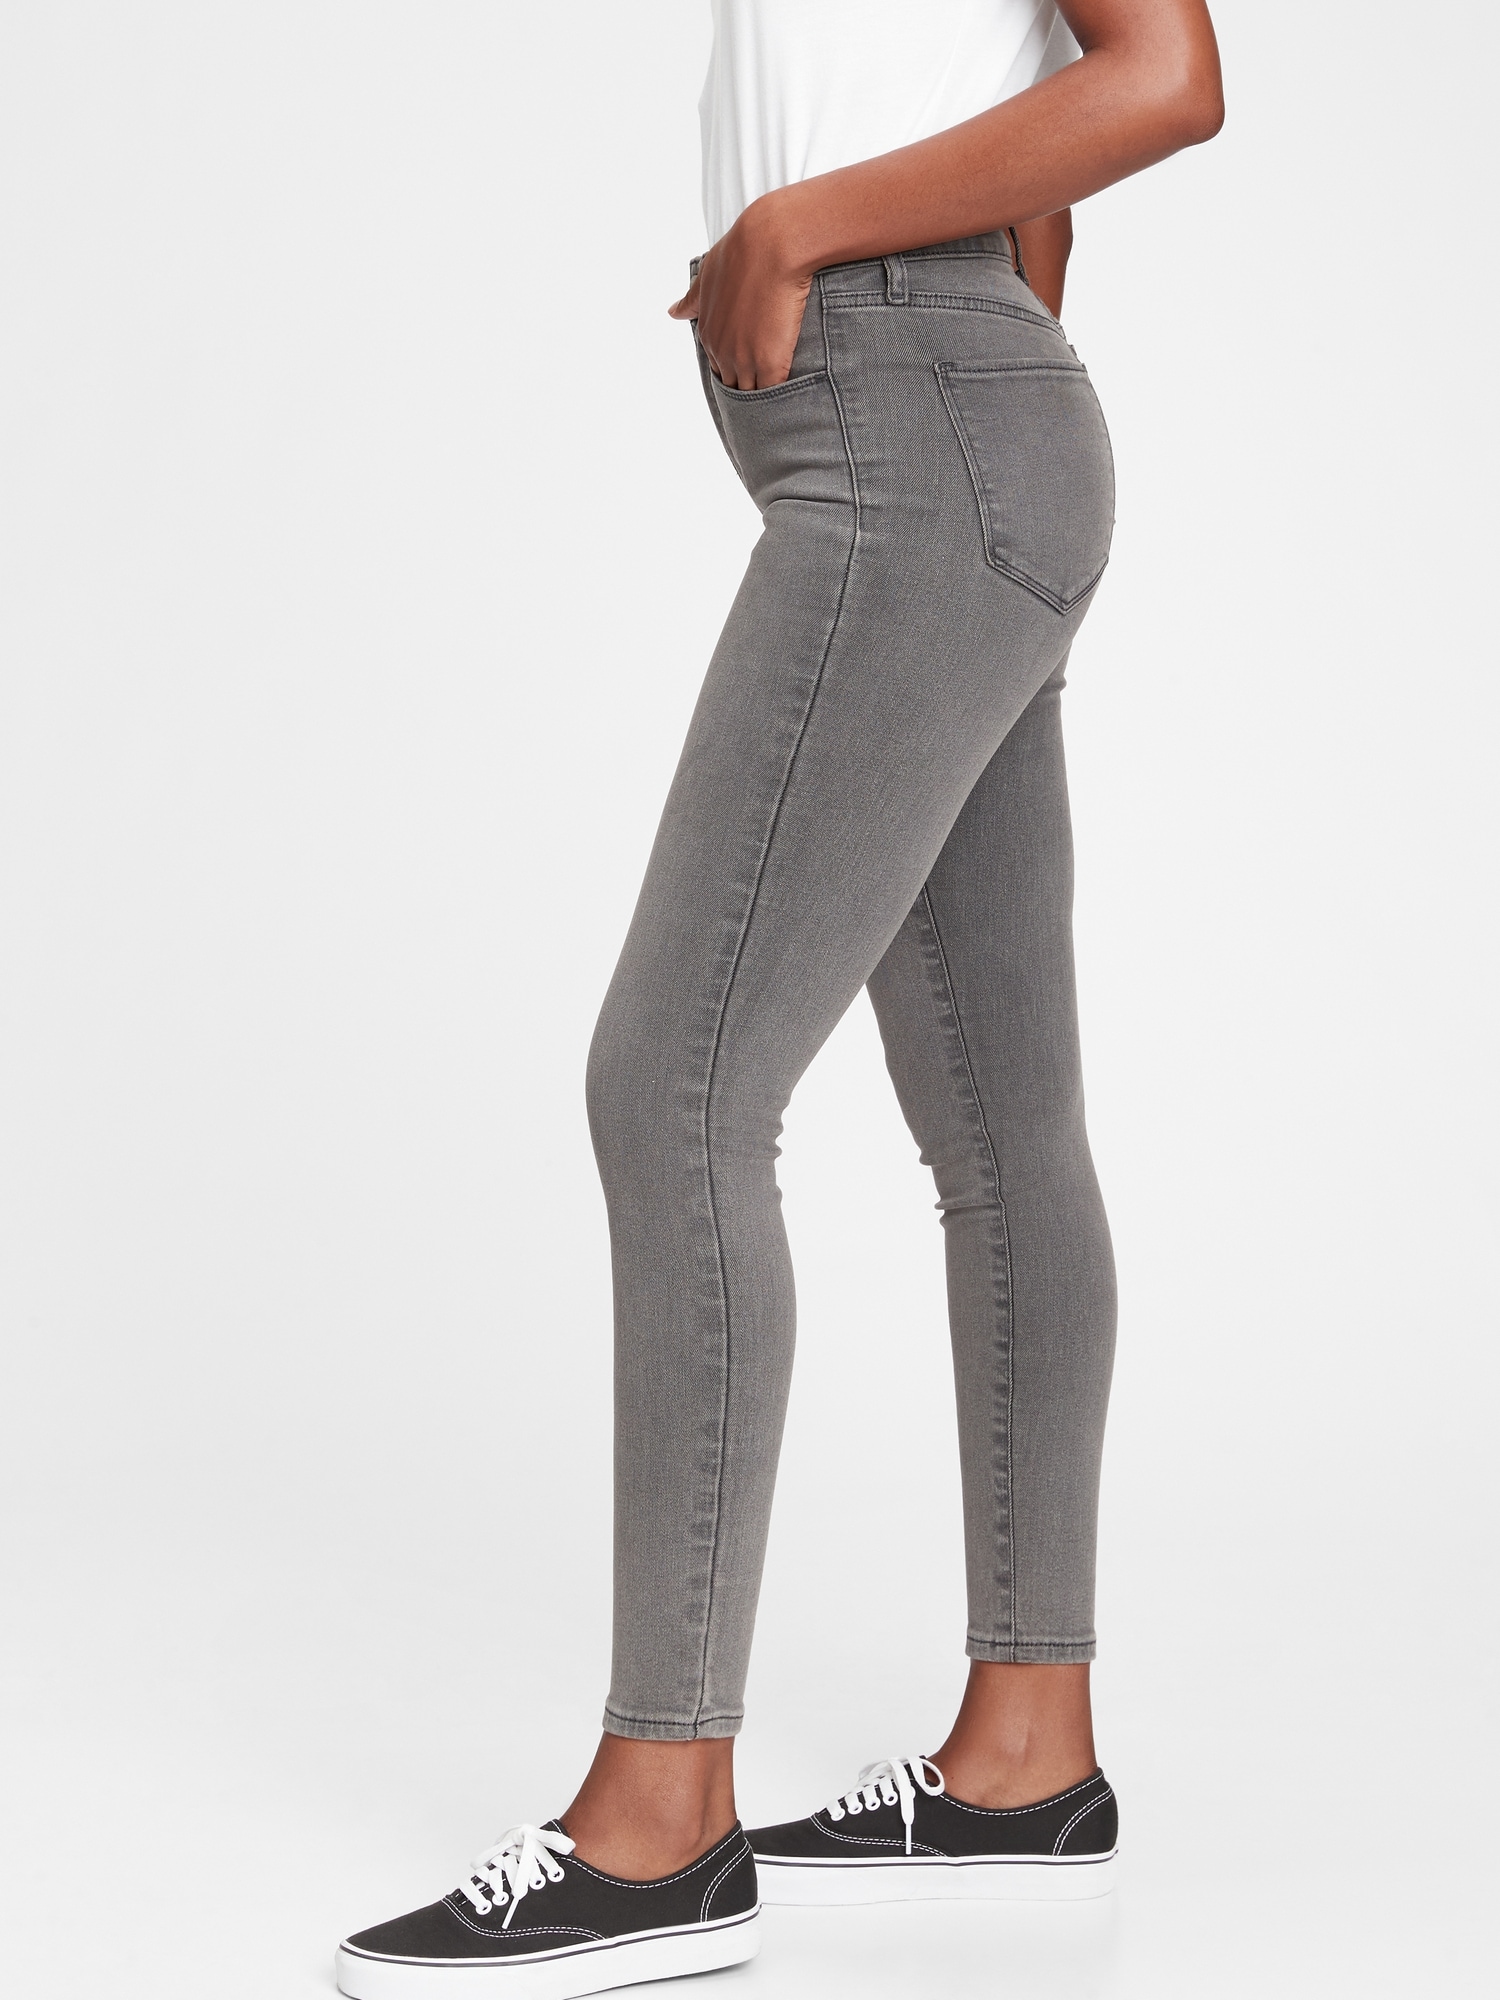 Gap High Rise Universal Jegging with Secret Smoothing Pockets